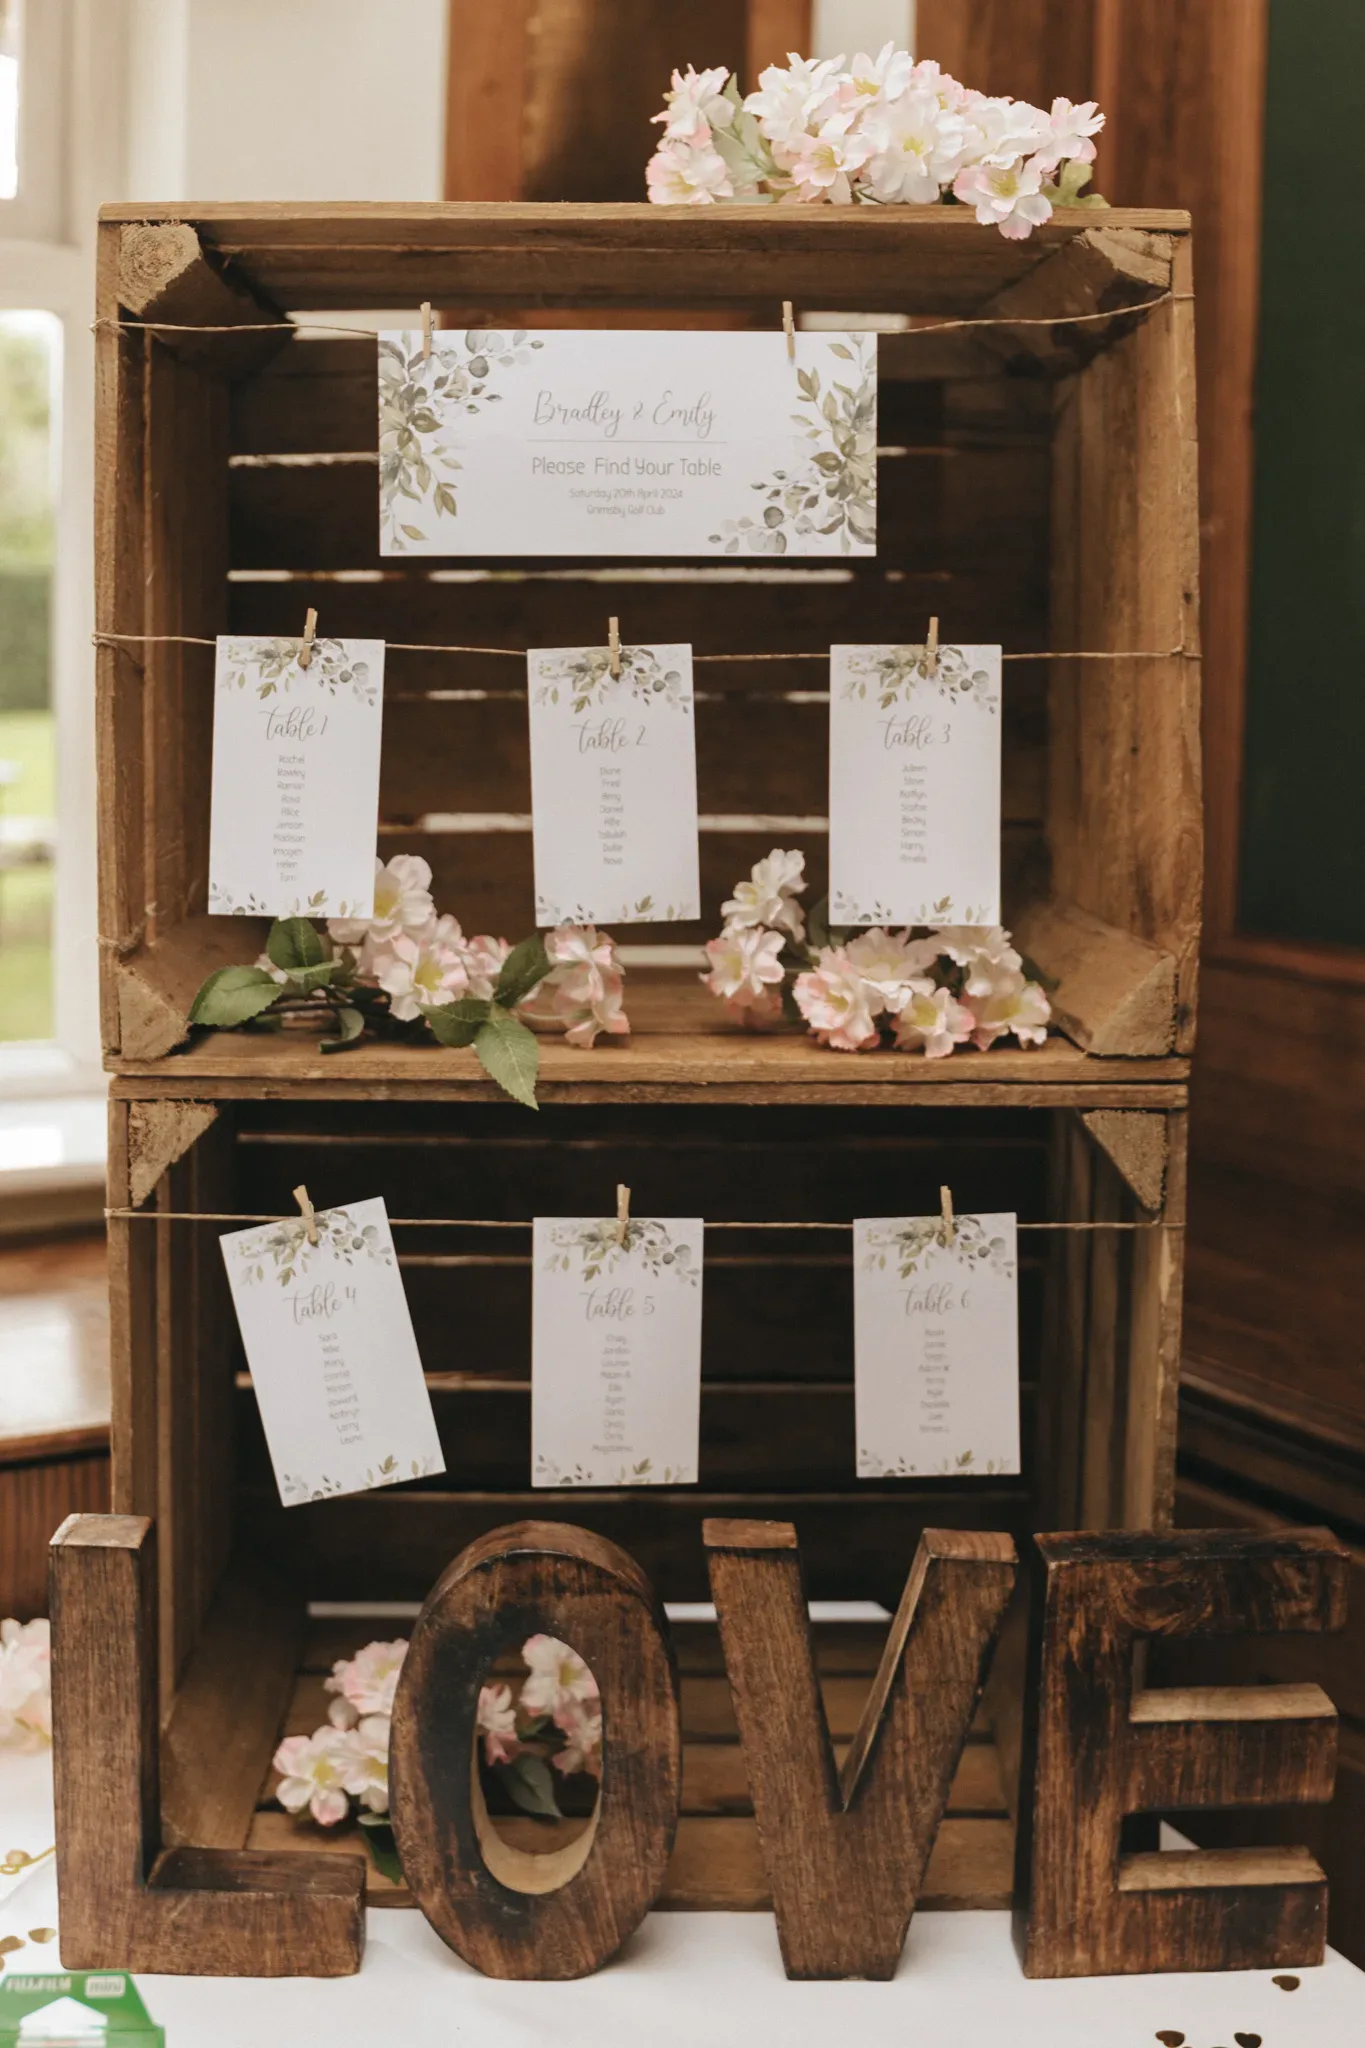 A rustic wooden crate displays wedding seating arrangement cards, adorned with floral decorations. a 'love' decoration in large letters is prominently featured at the bottom, alongside a floral-framed mirror with a reflection of flowers.